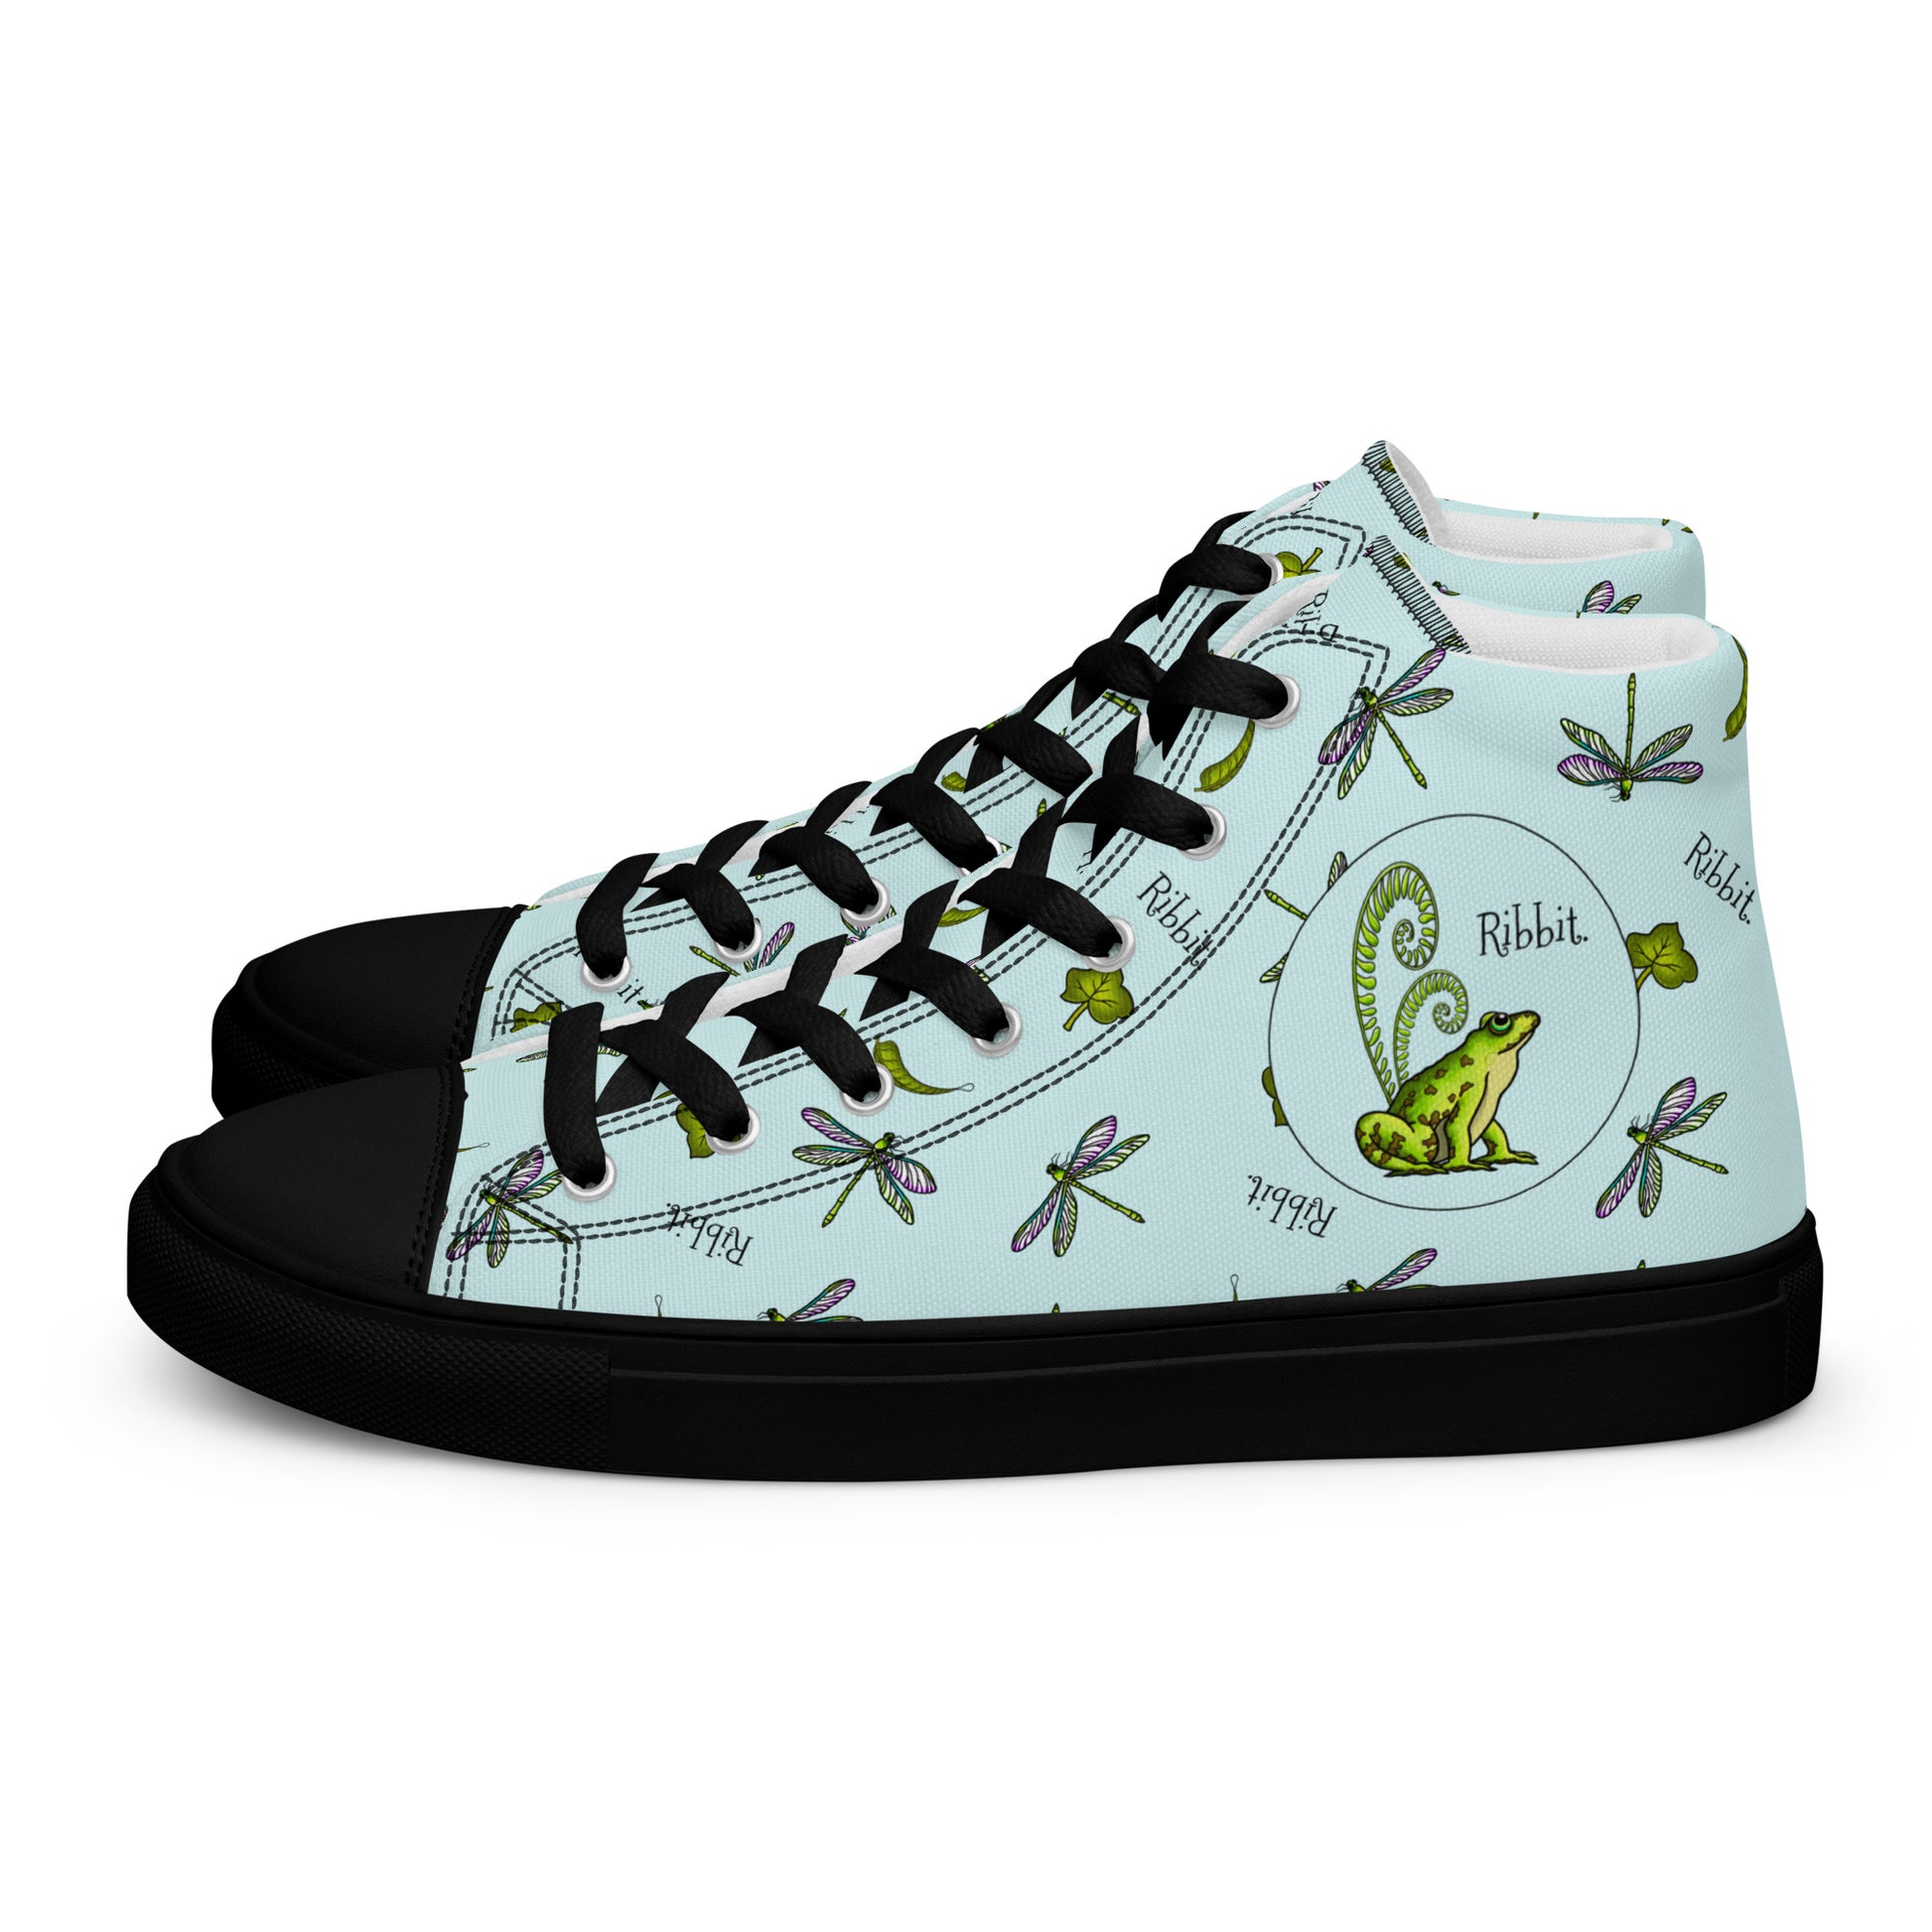 Stormseye Design Pretty Frog Dragonfly high top shoes, black sole, side view